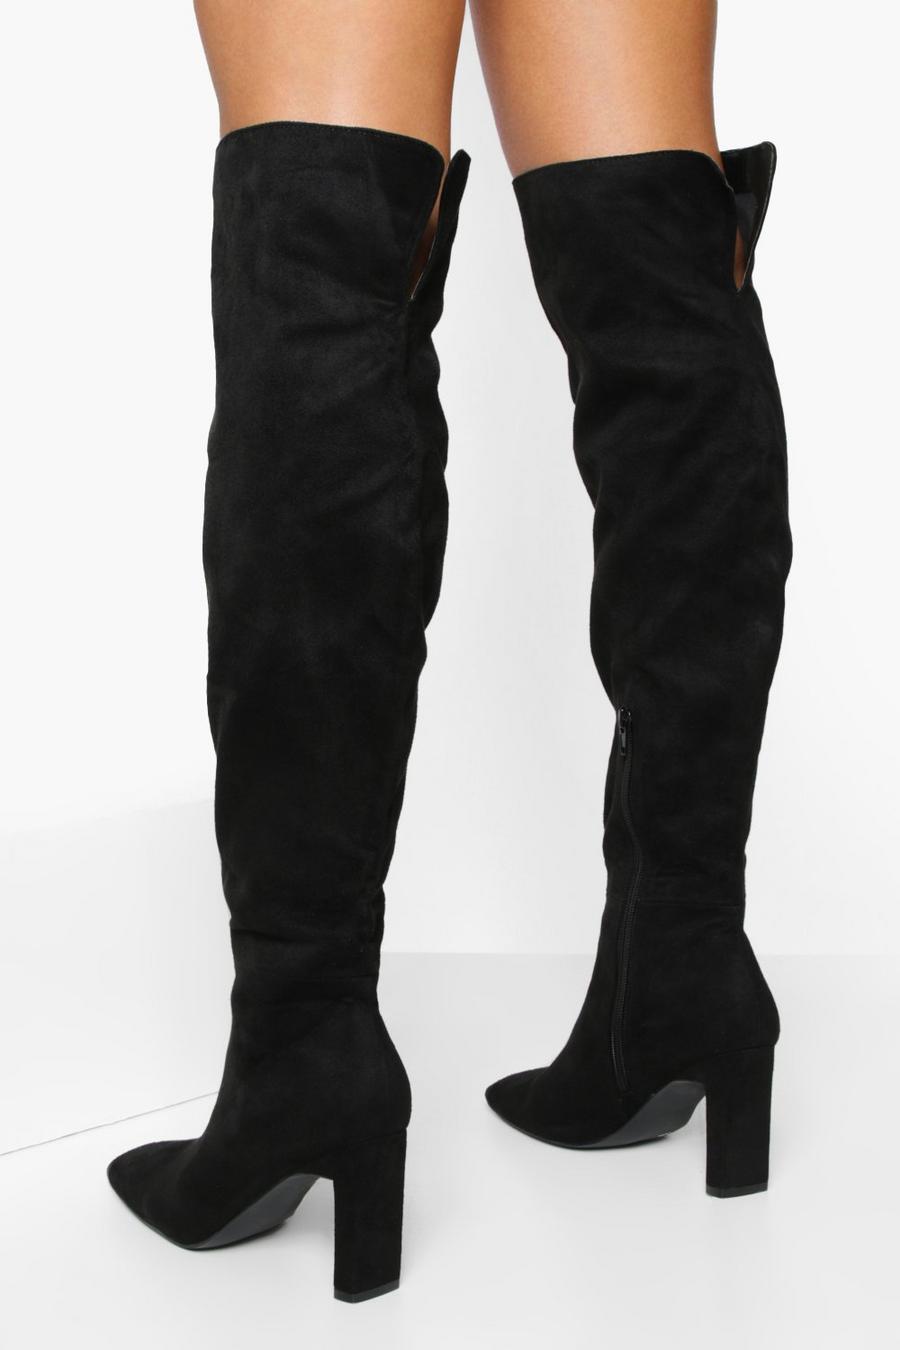 Black Square Toe Thigh High Boots